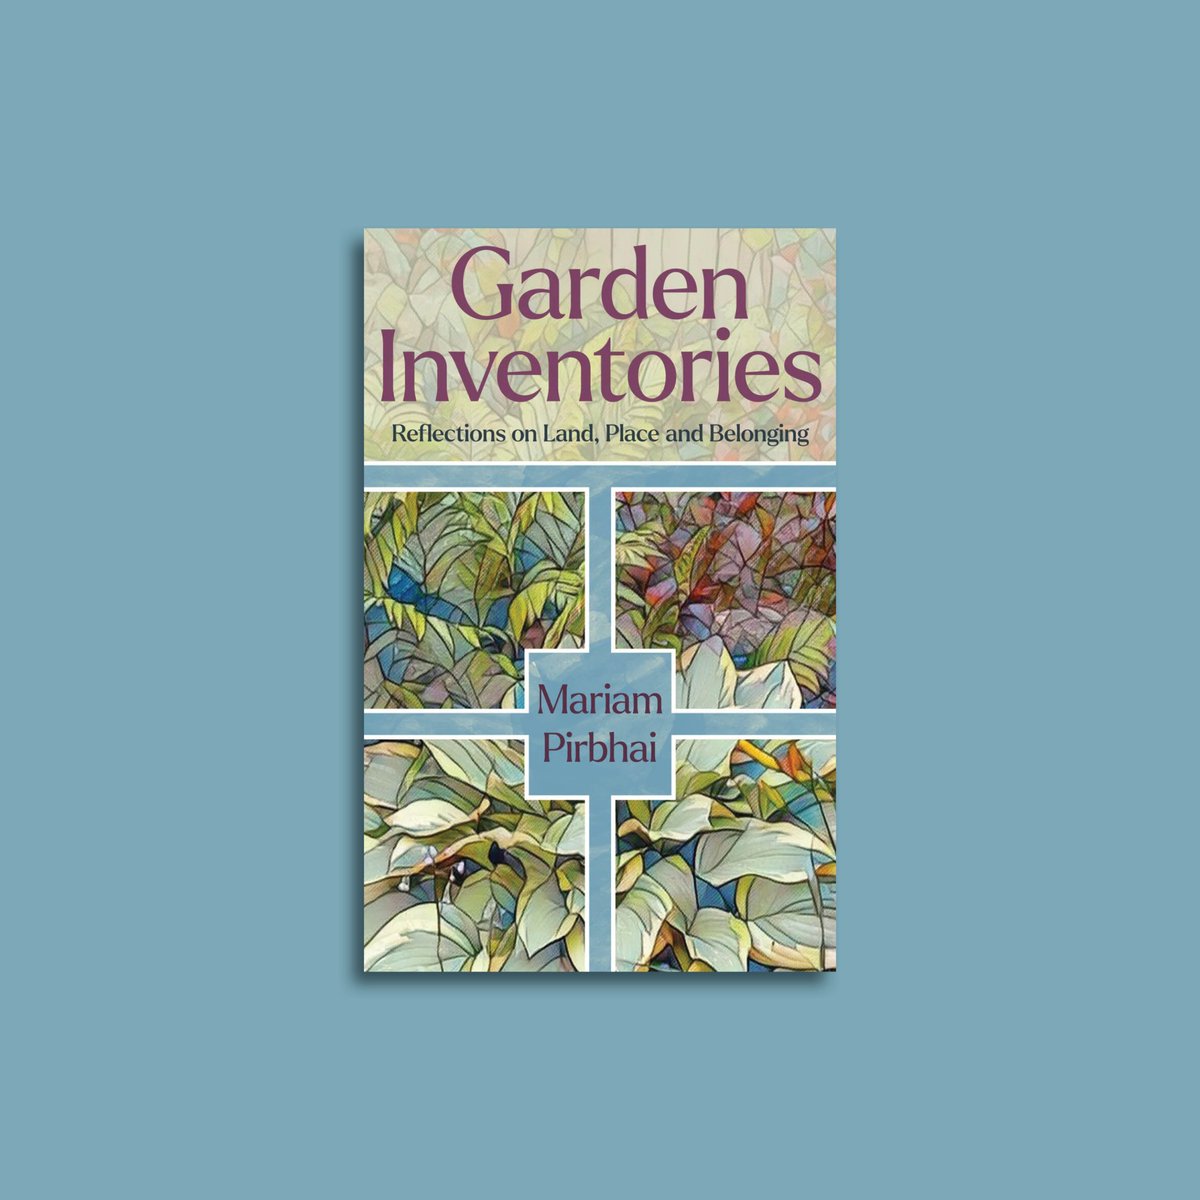 Garden Inventories “is an endearing and rich collection of essays on the legacies of colonialism, the pangs of the émigré, and the complexities of belonging.” Lara El Mekaui reviews this “unique take on a settlement story.” worldliteraturetoday.org/2024/may/garde…